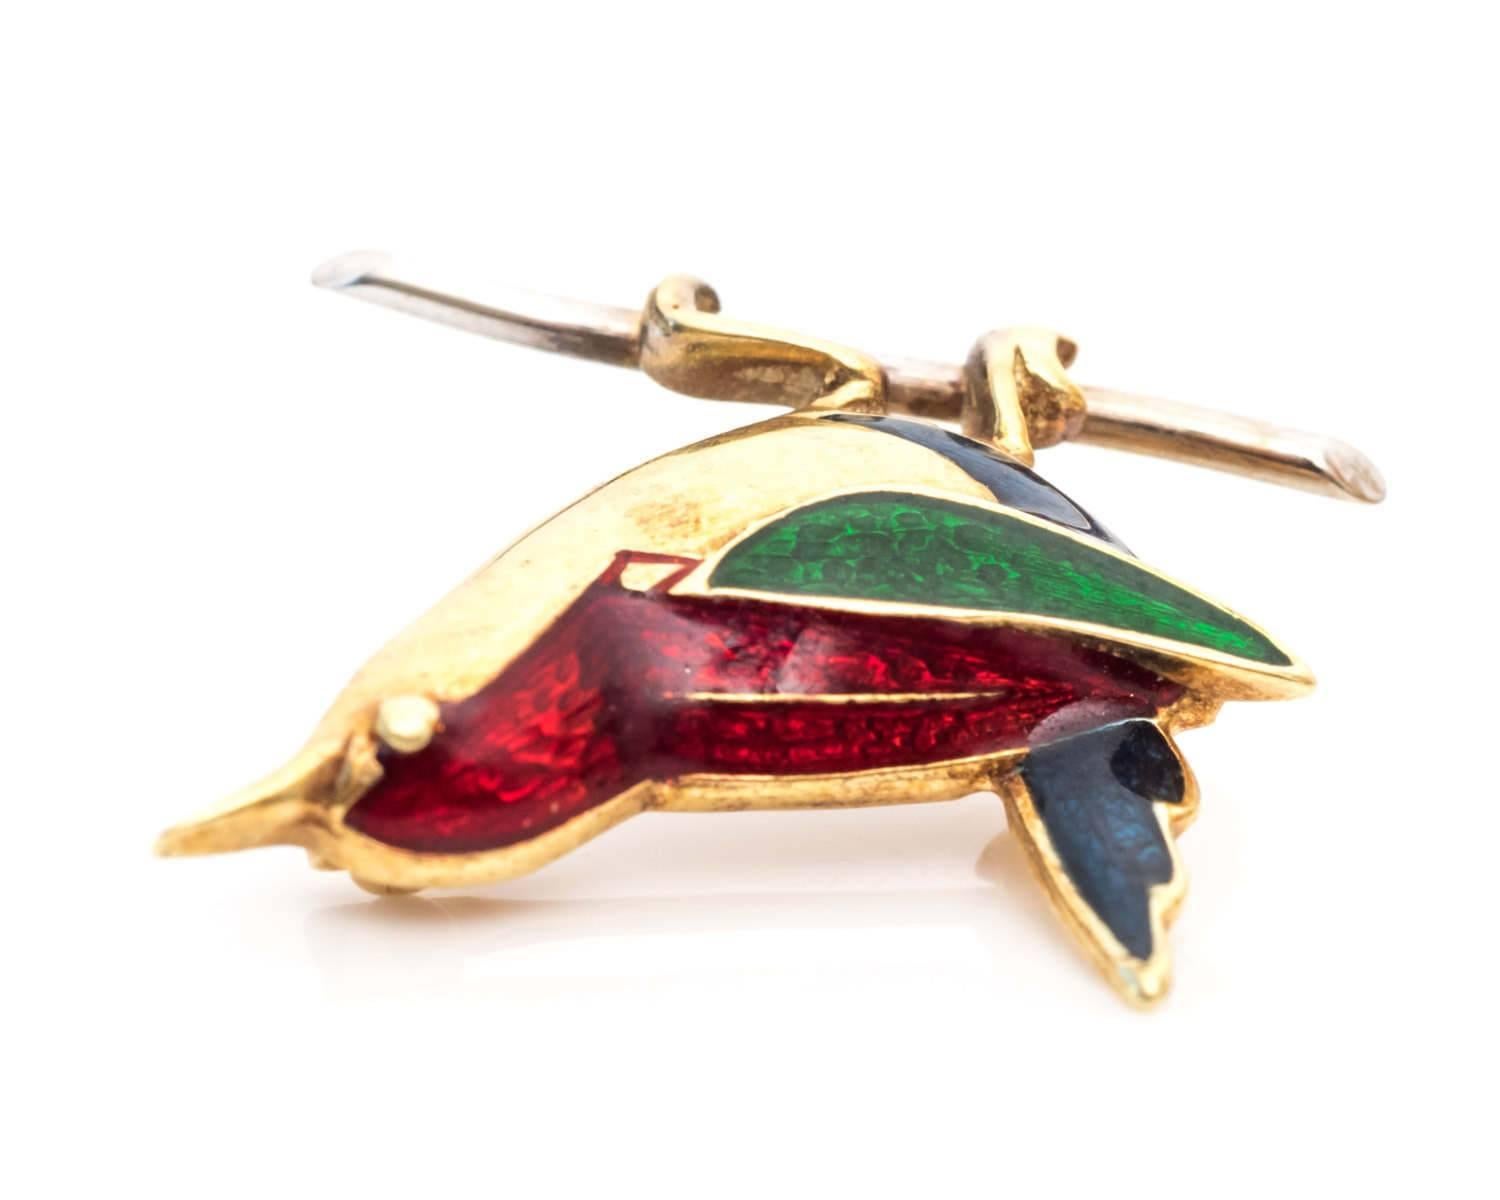 Retro 1950s Bird Motif Brooch Pin with Colorful Enamel and 14 Karat Gold